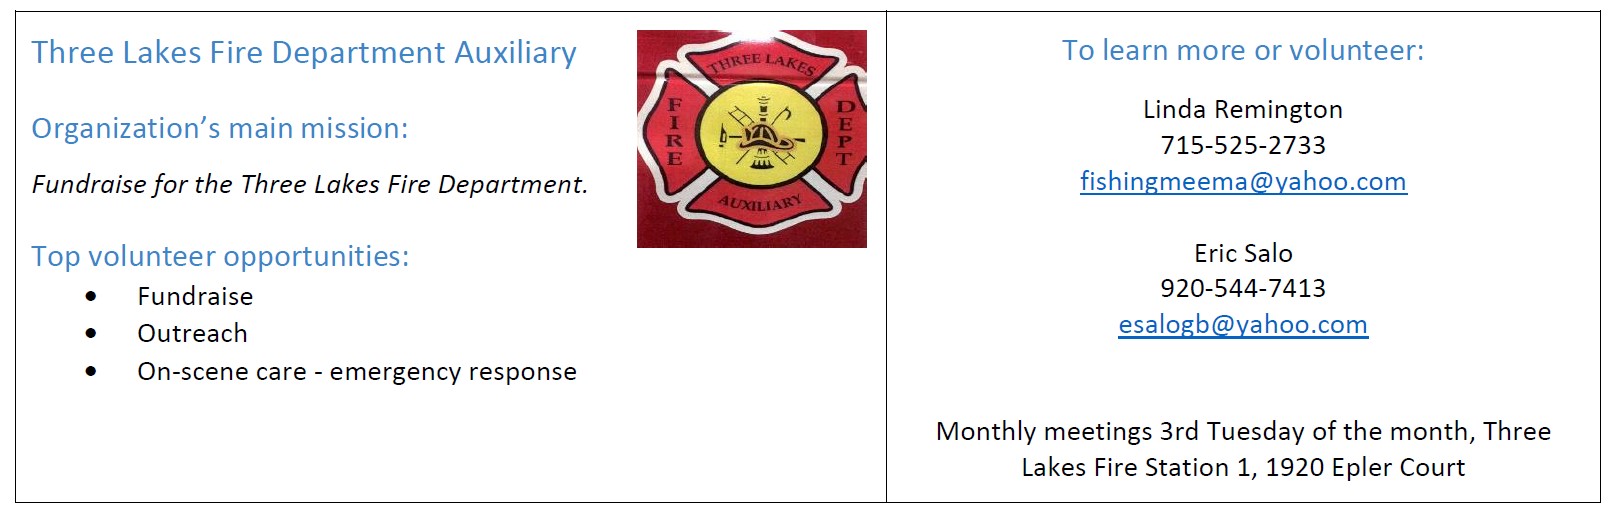 Volunteer opportunities at the Three Lakes Fire Department Auxiliary